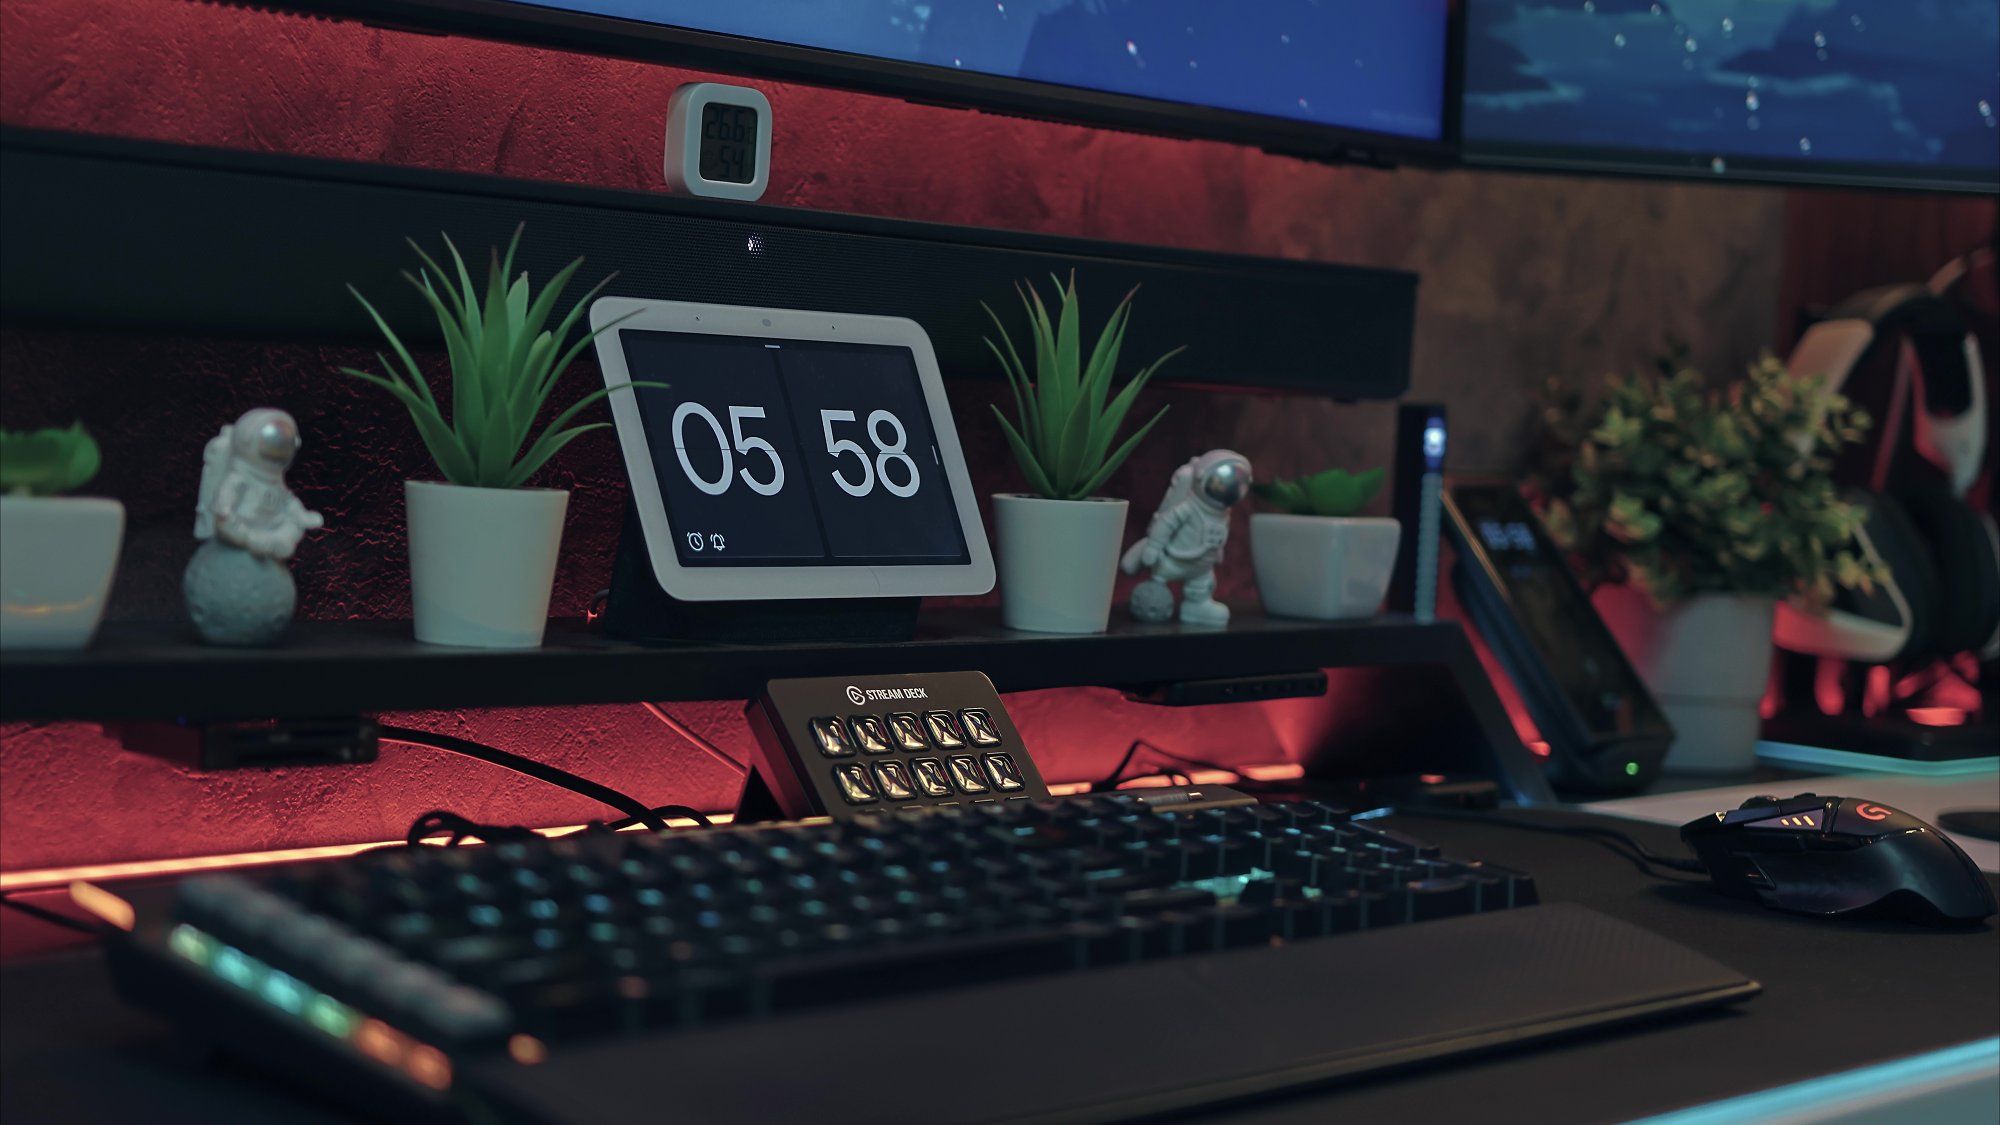 A desktop setup featuring a Corsair K95 Platinum keyboard, a Logitech G502 wired mouse, as well as some figurines and artificial plants